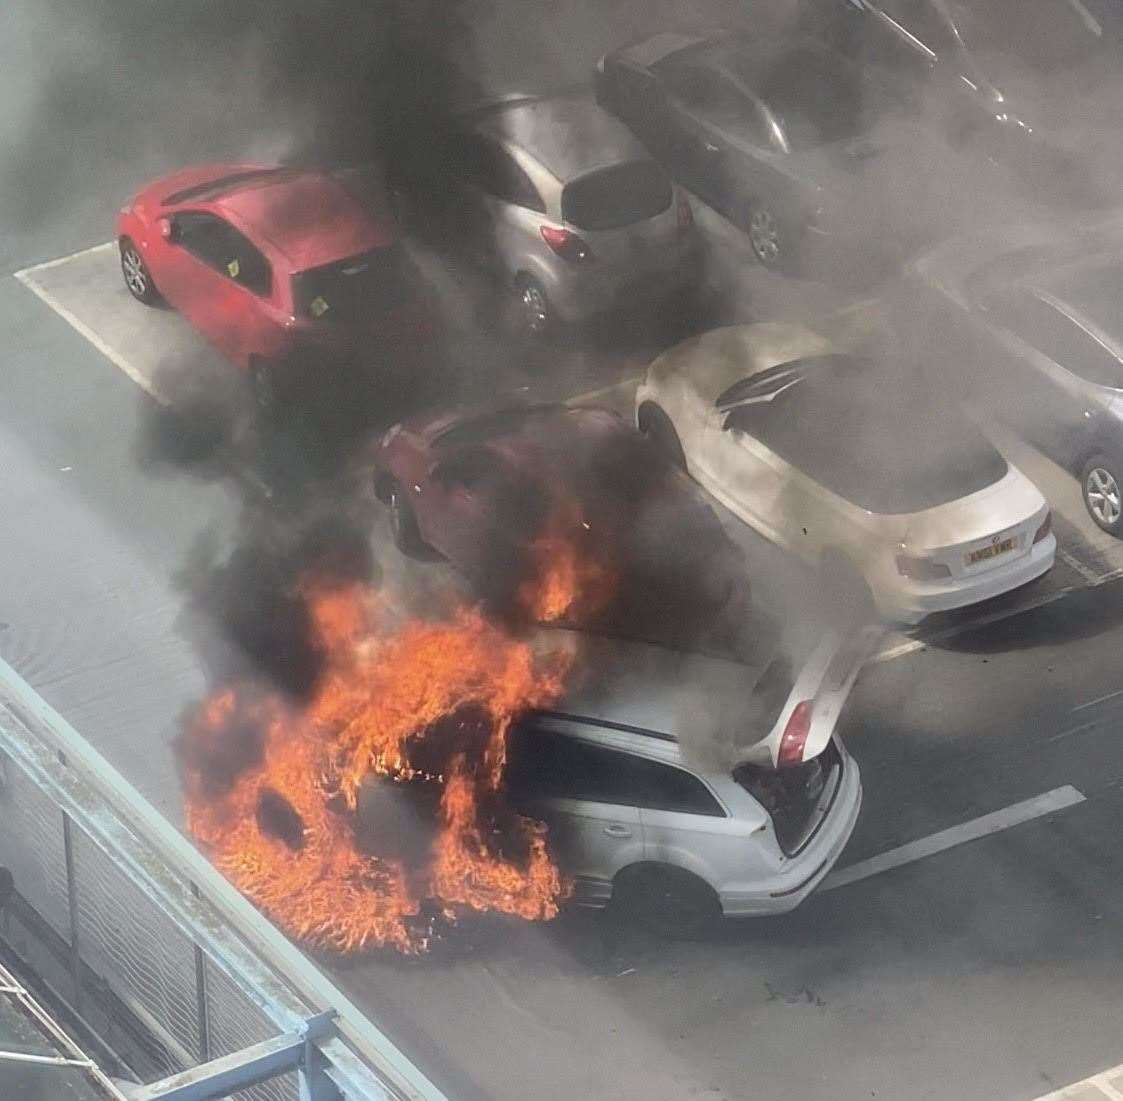 Car fire at The Mall, Maidstone. Pic Abi Wilding